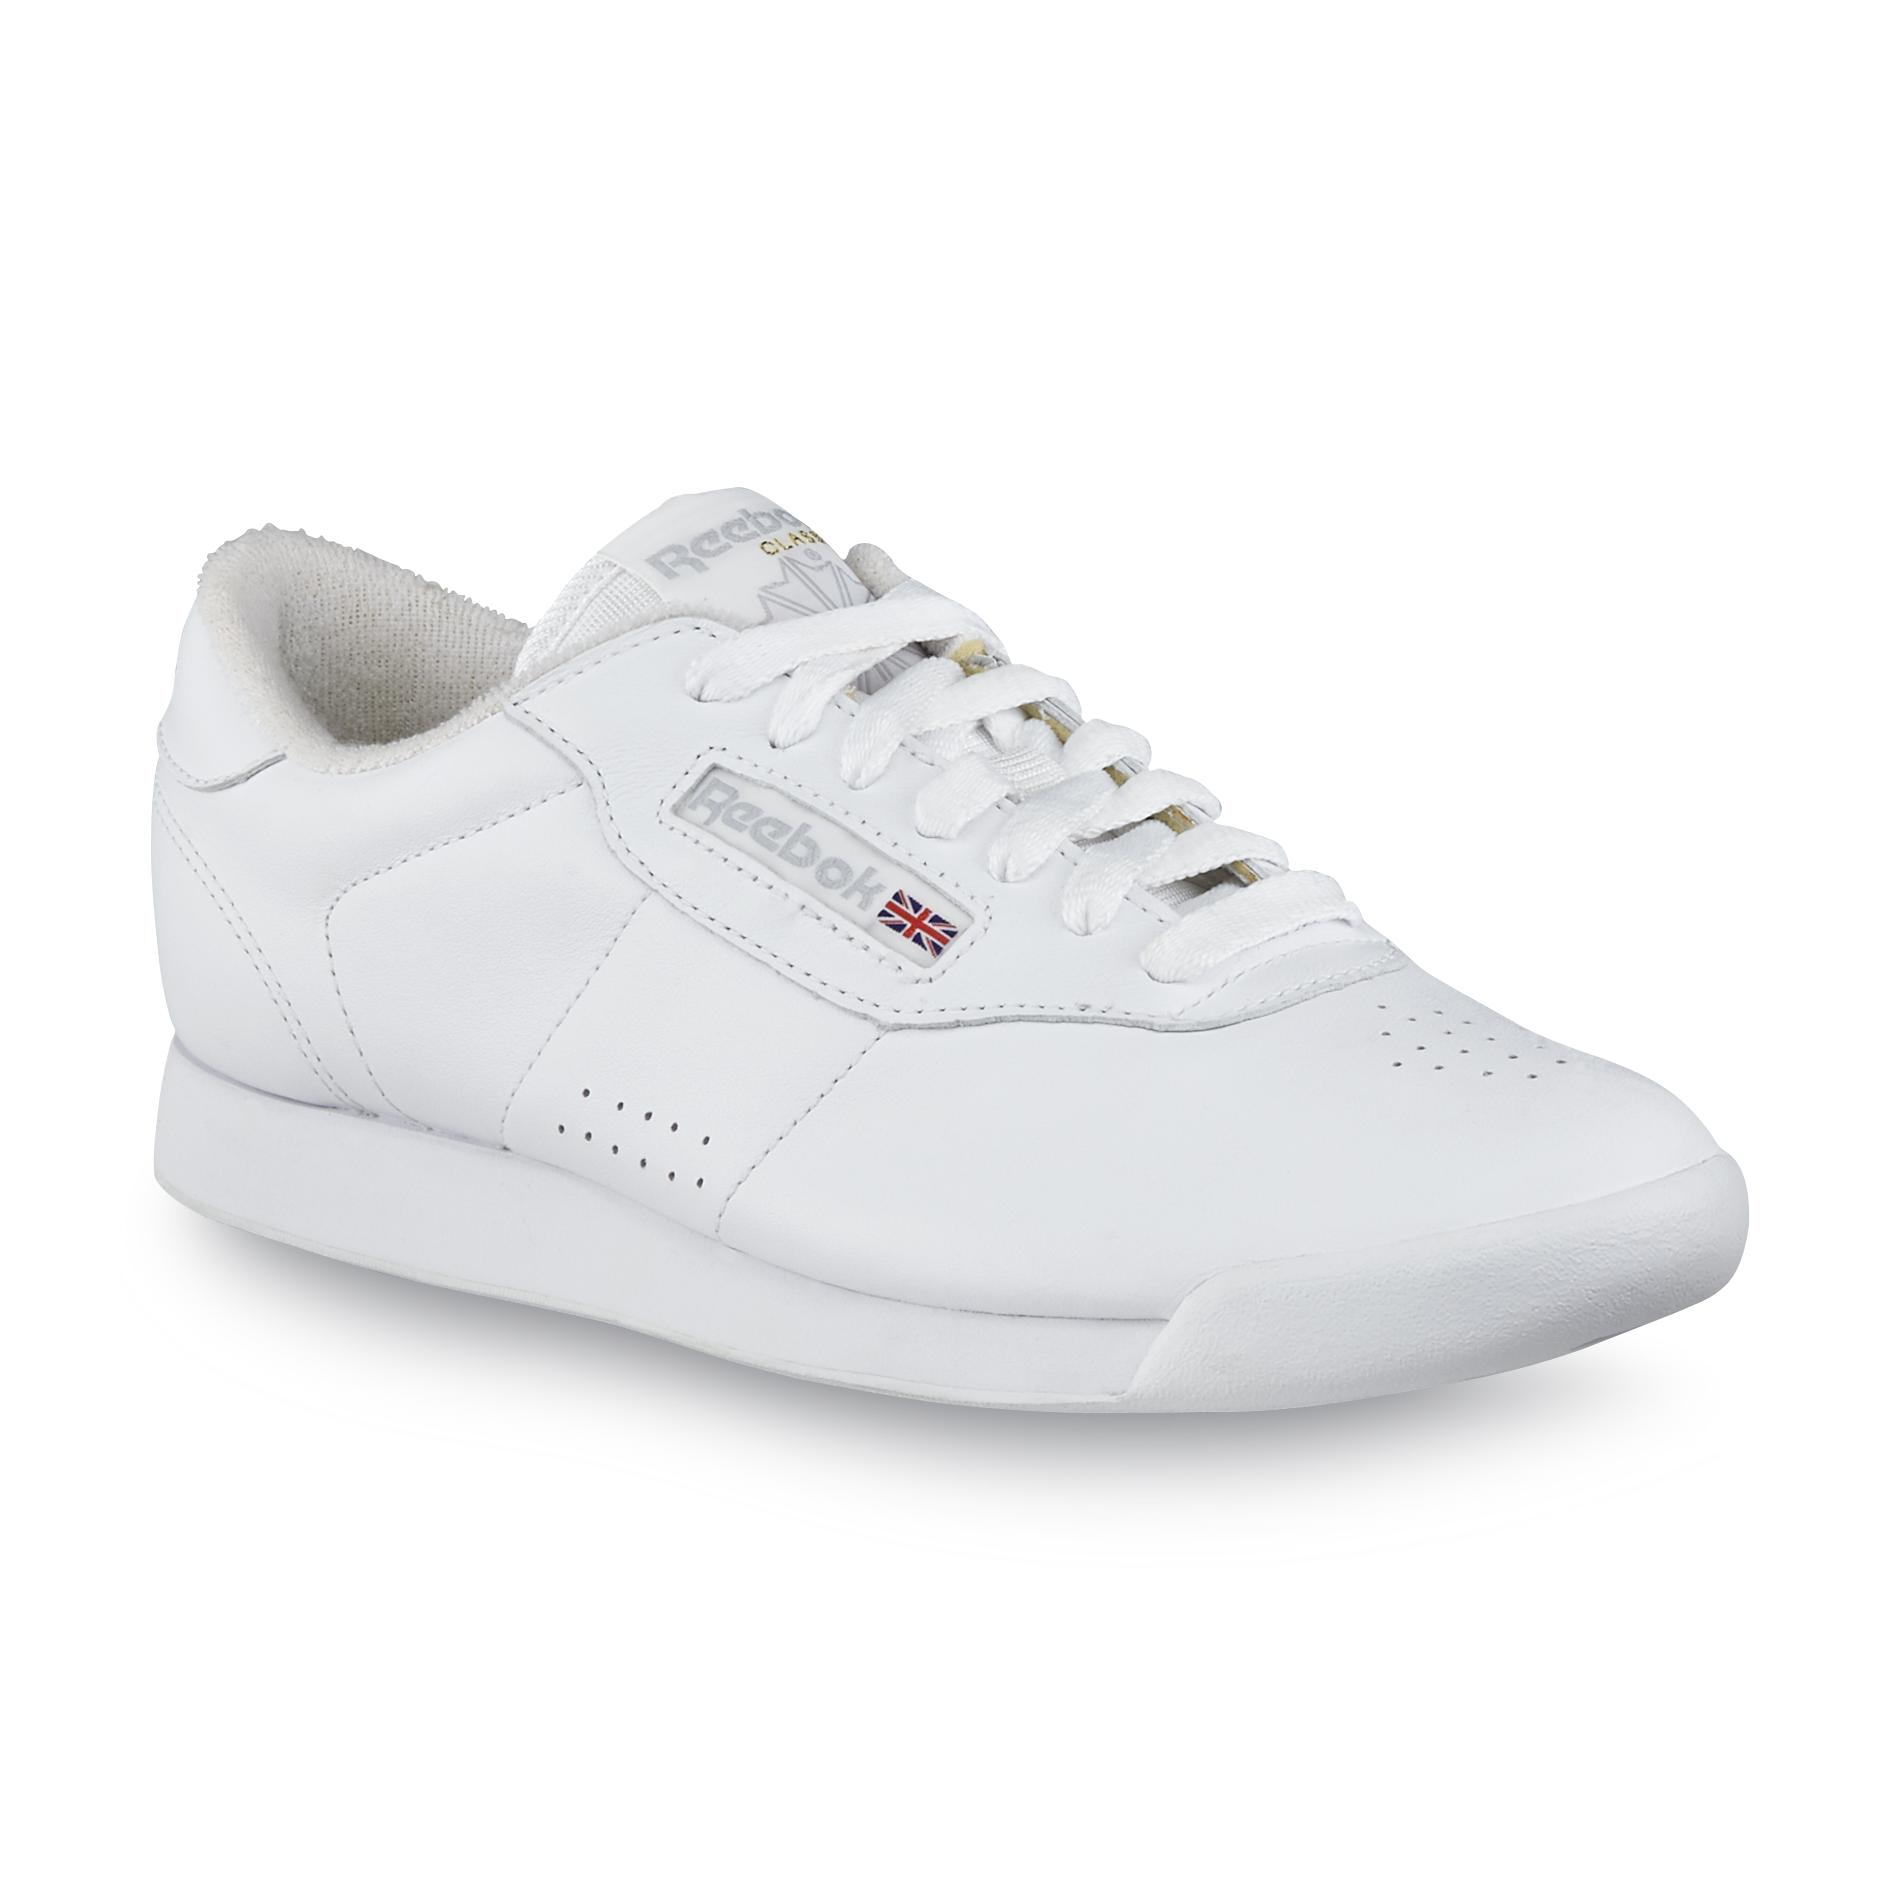 Casual Athletic Shoe - White Wide Width 